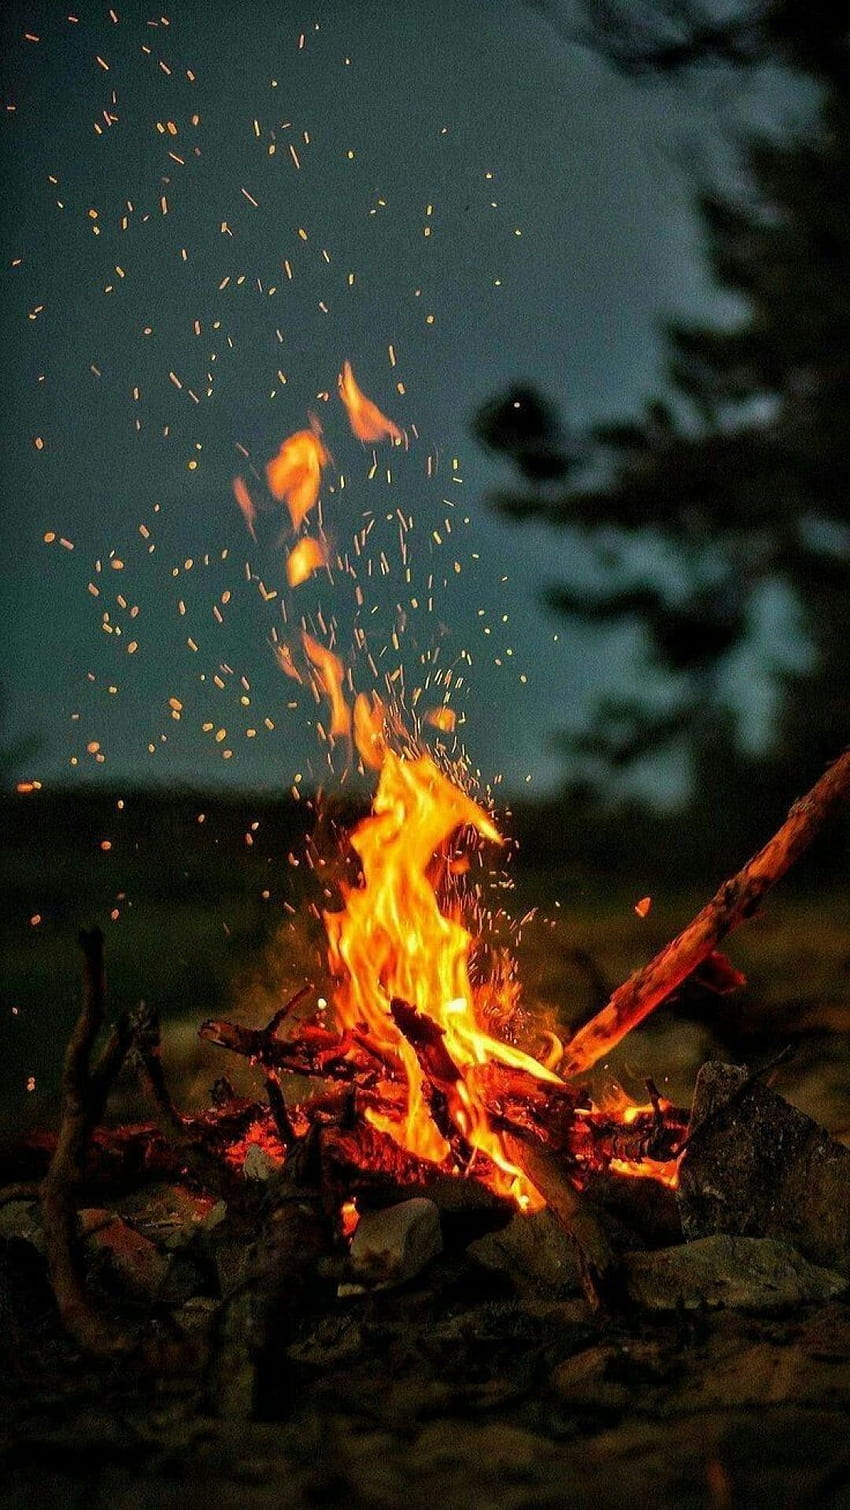 Fire - Android, iPhone, Background / (, ) wall in 2020. Camping , iphone love, Aesthetic HD phone wallpaper